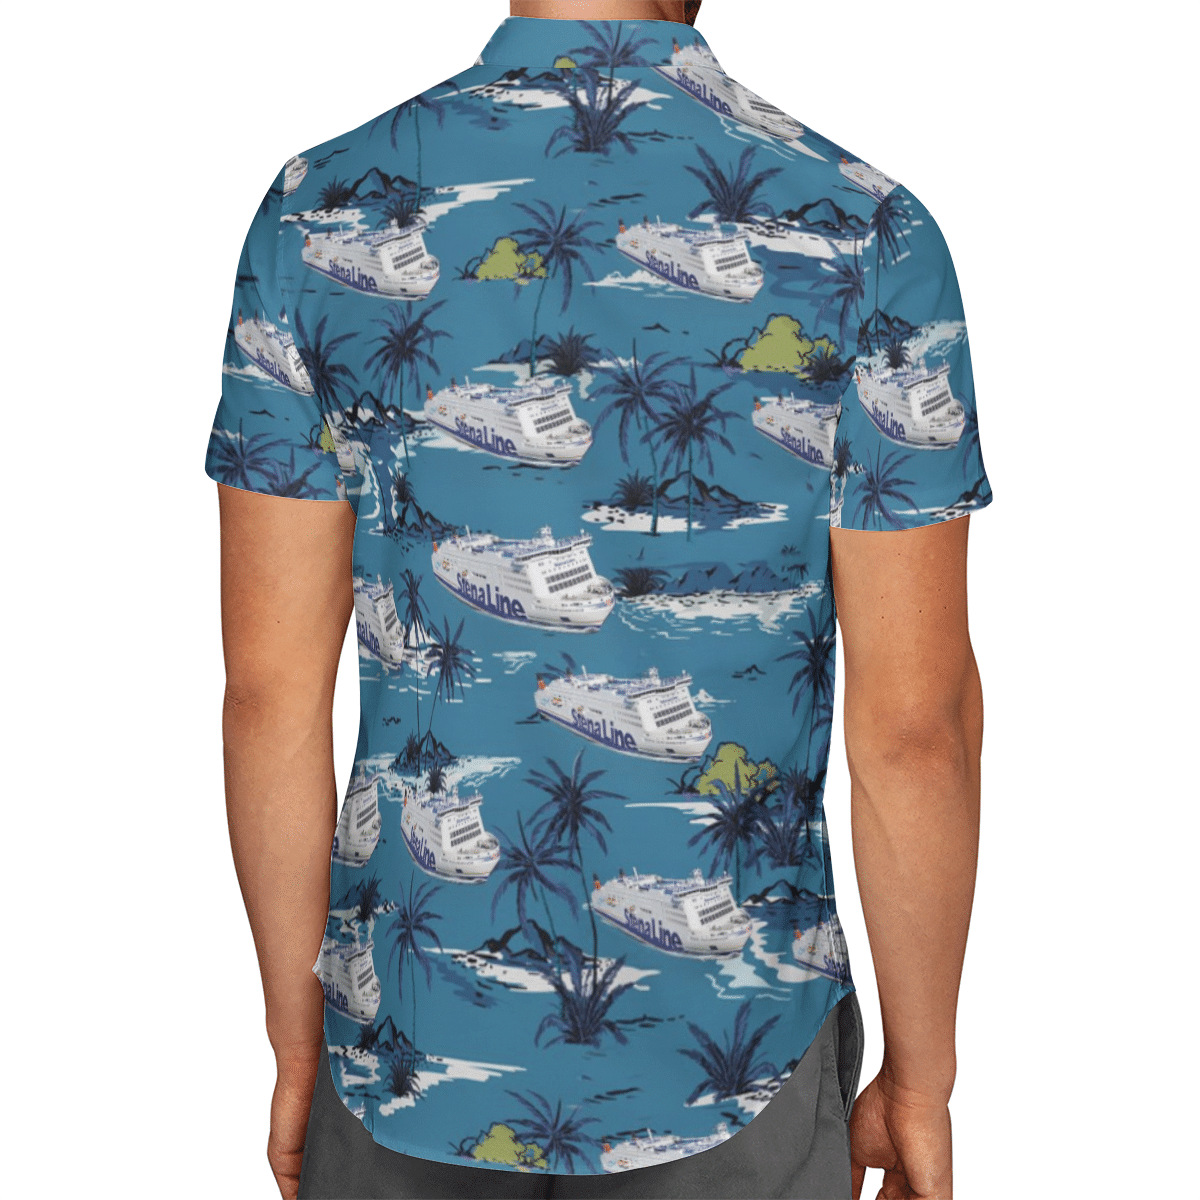 Going to the beach with a quality shirt 184